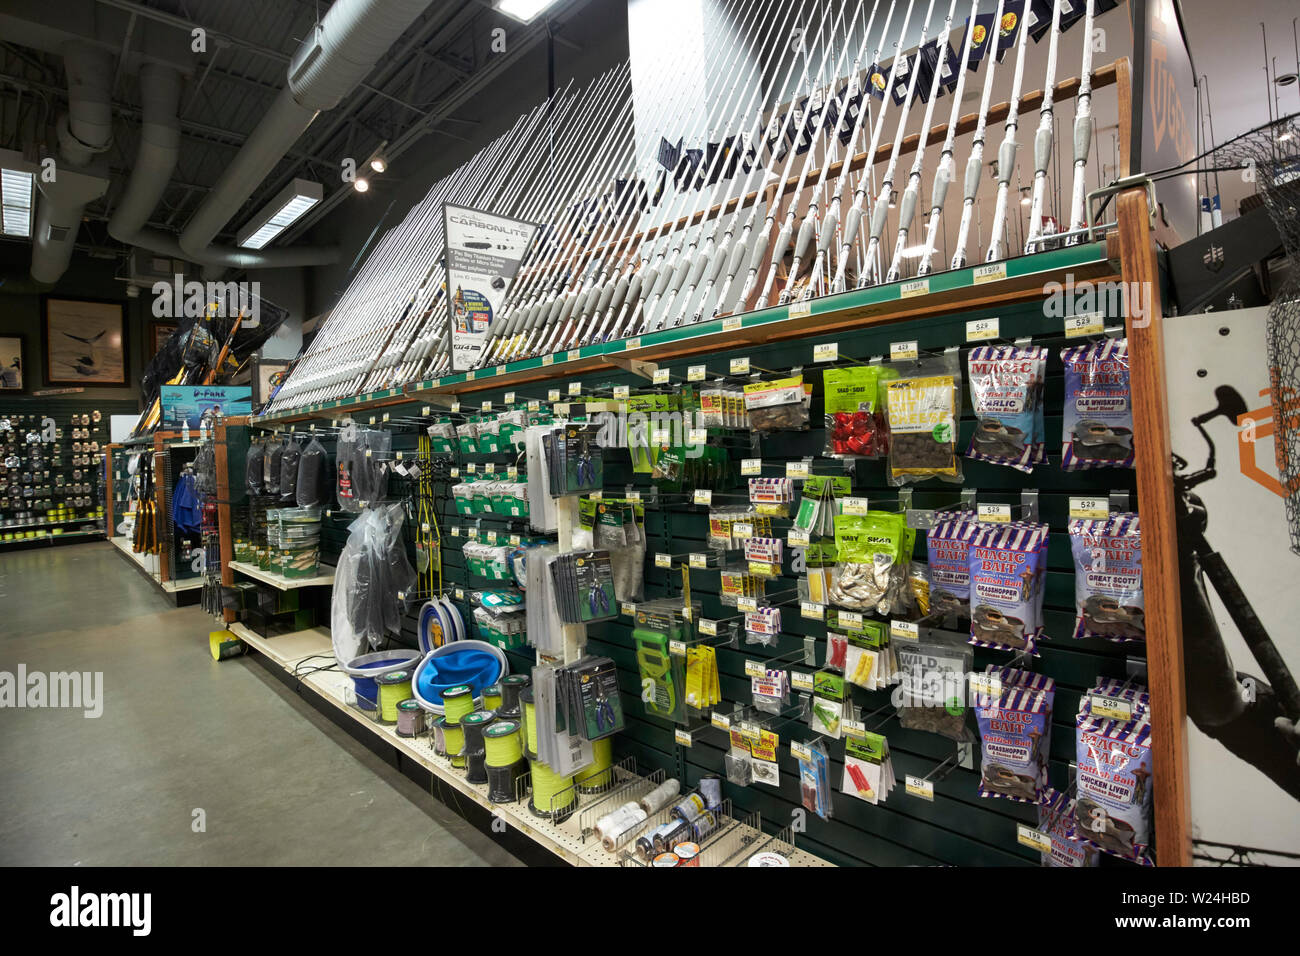 Fishing Tackle Store Stock Photos Fishing Tackle Store Stock